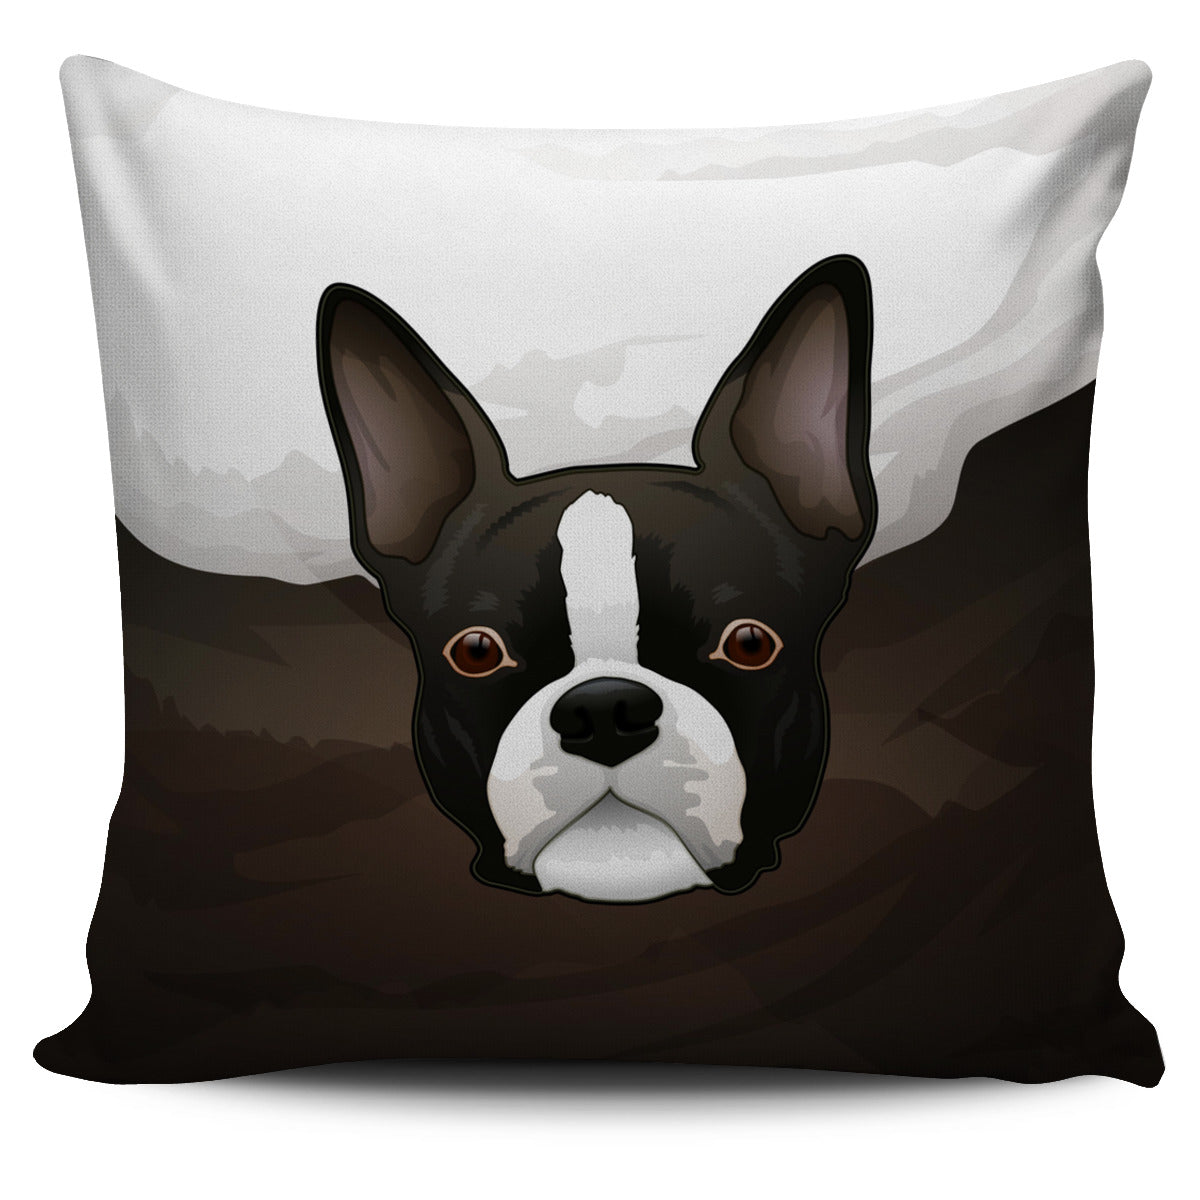 Real Boston Terrier Pillow Cover